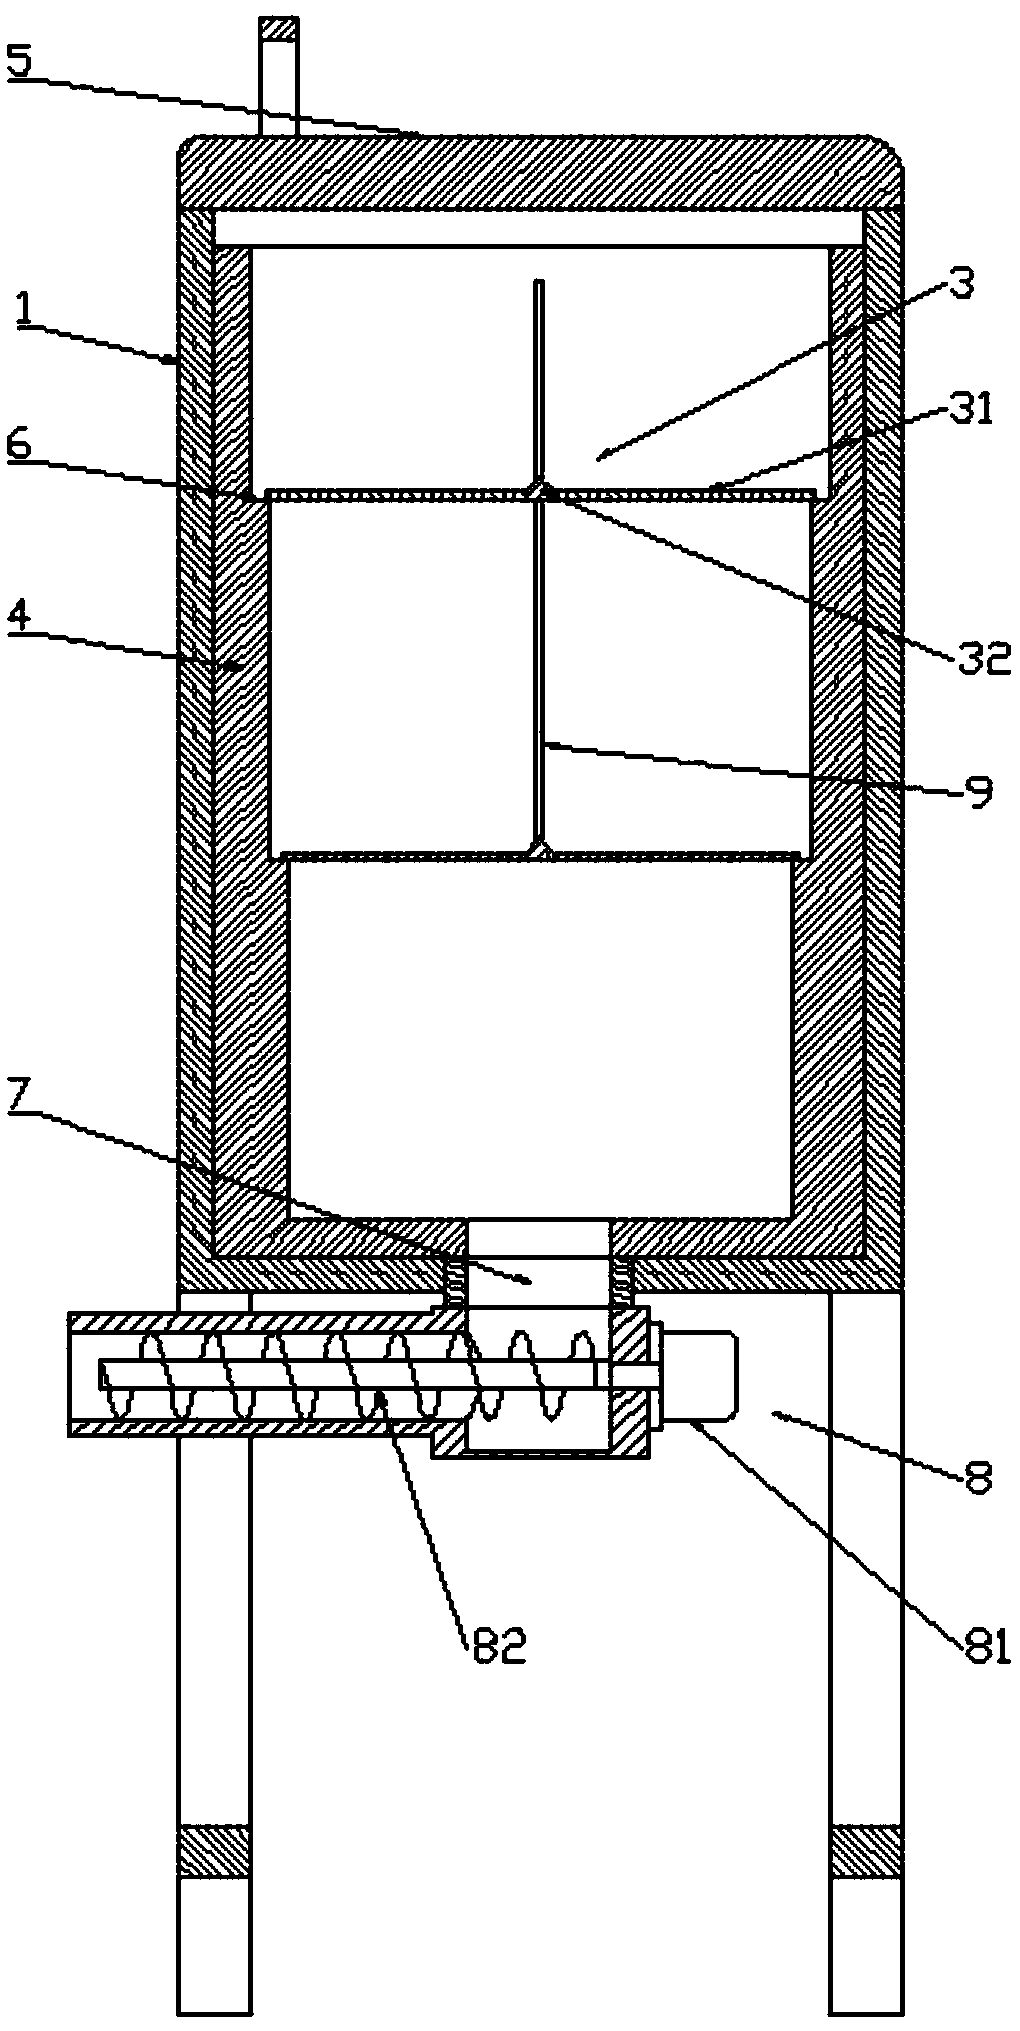 Rubber supply device for low-pressure injection molding equipment